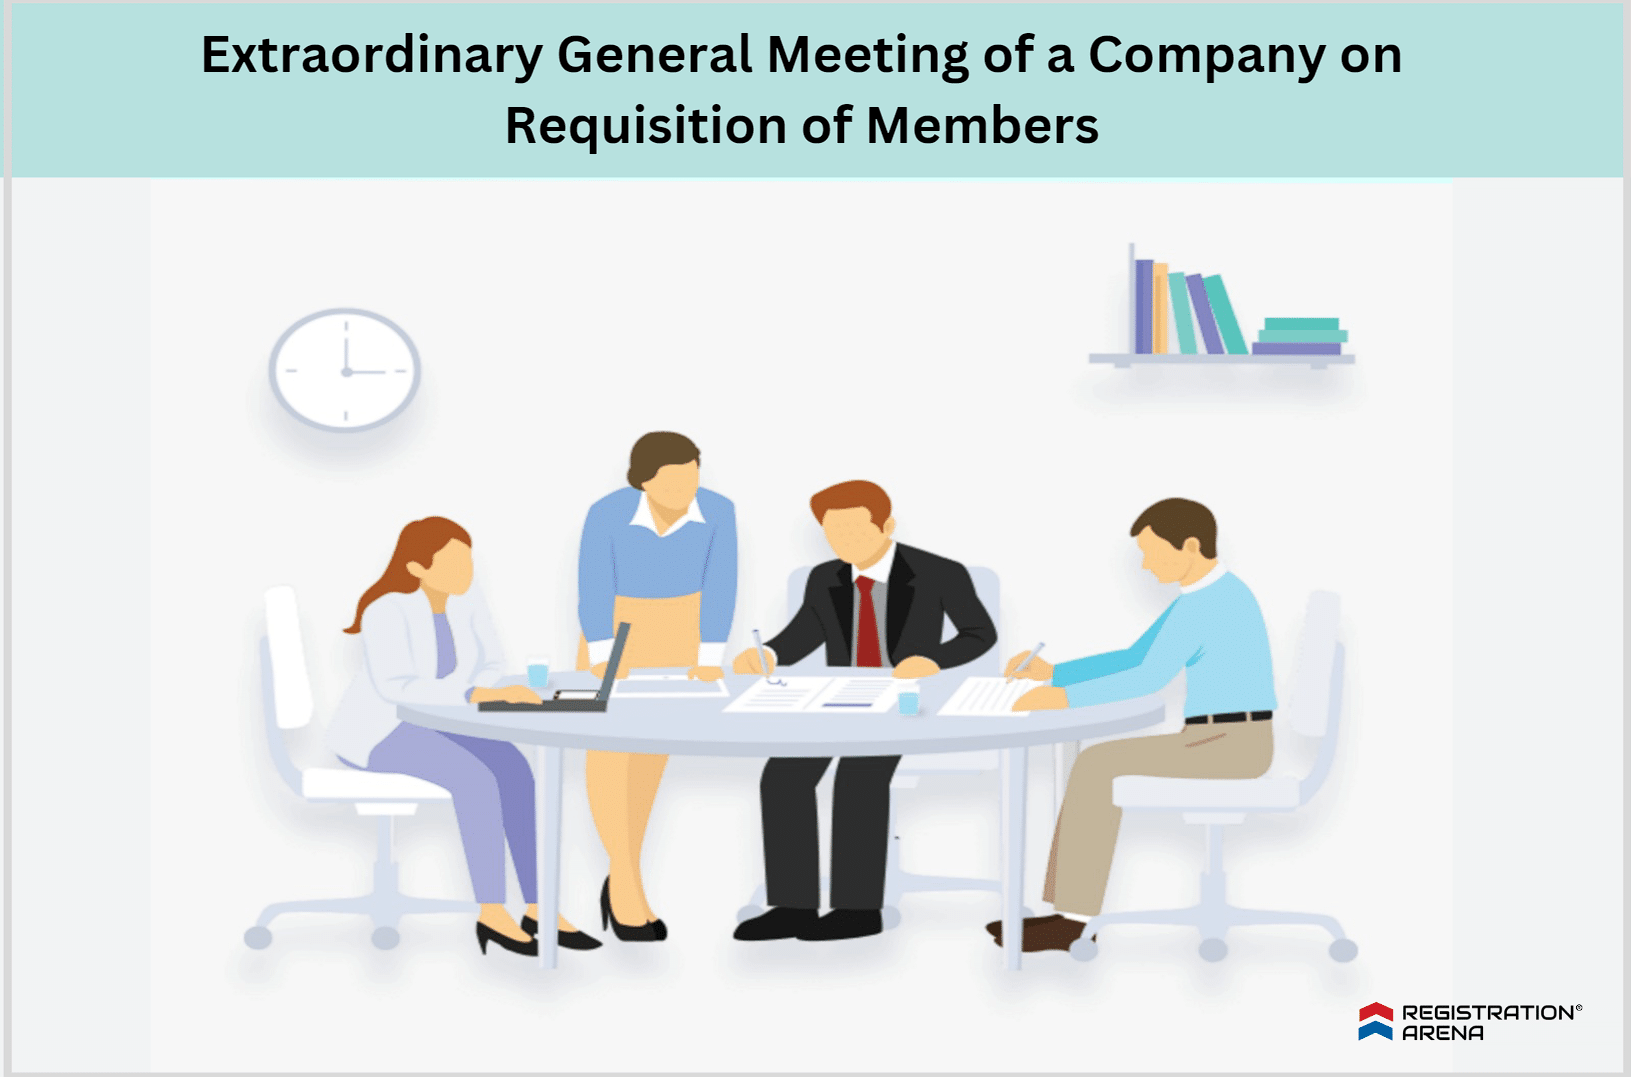 Extraordinary General Meeting of a Company on Requisition of Members